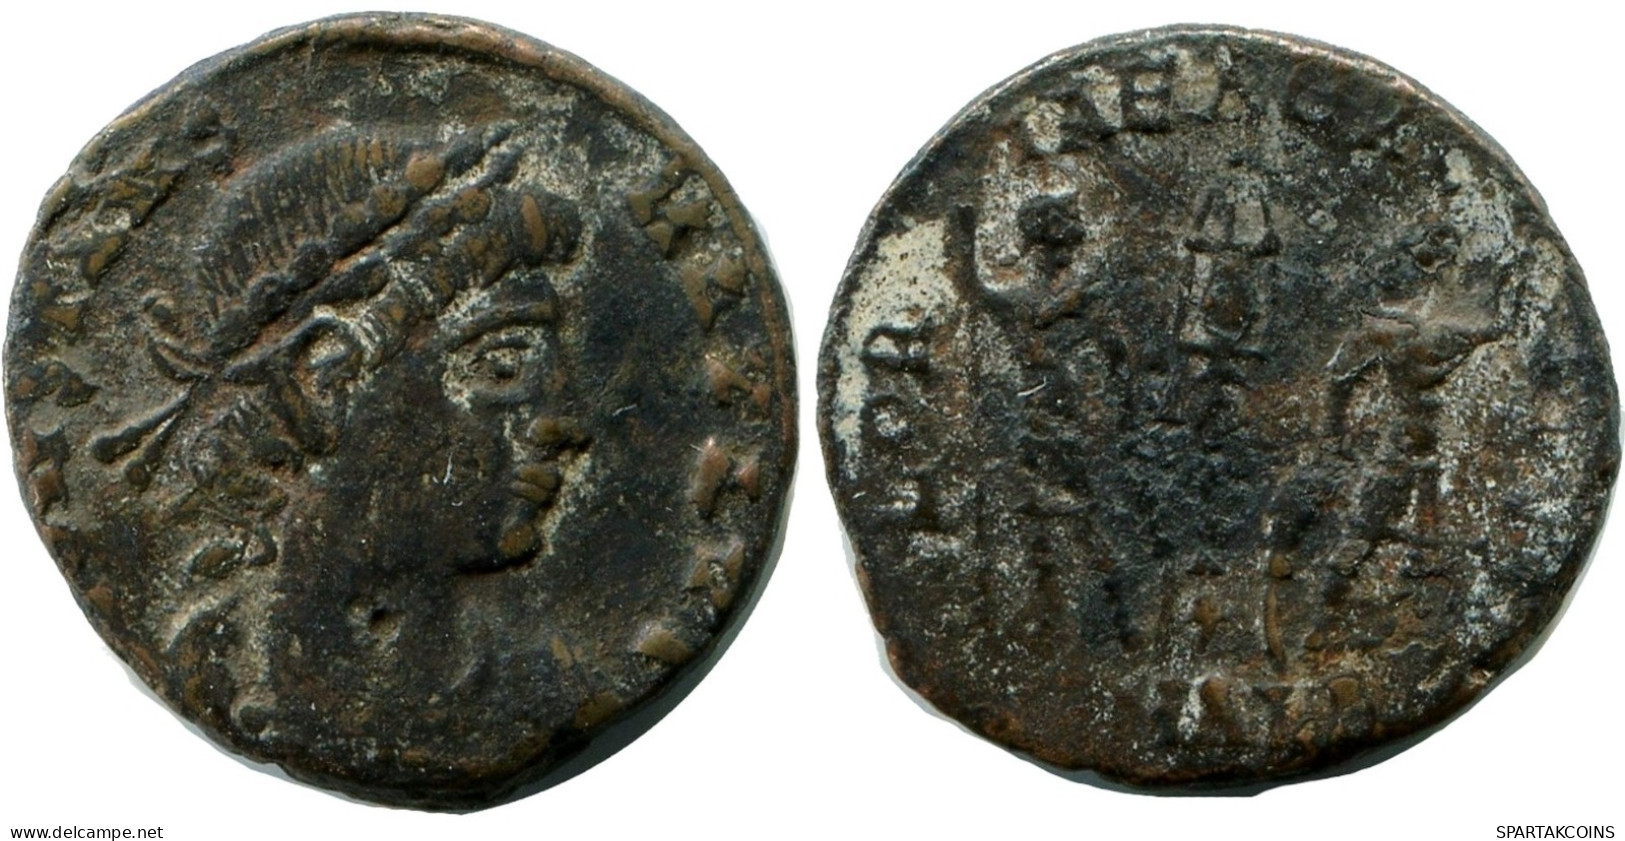 CONSTANS MINTED IN ALEKSANDRIA FOUND IN IHNASYAH HOARD EGYPT #ANC11349.14.D.A - The Christian Empire (307 AD Tot 363 AD)